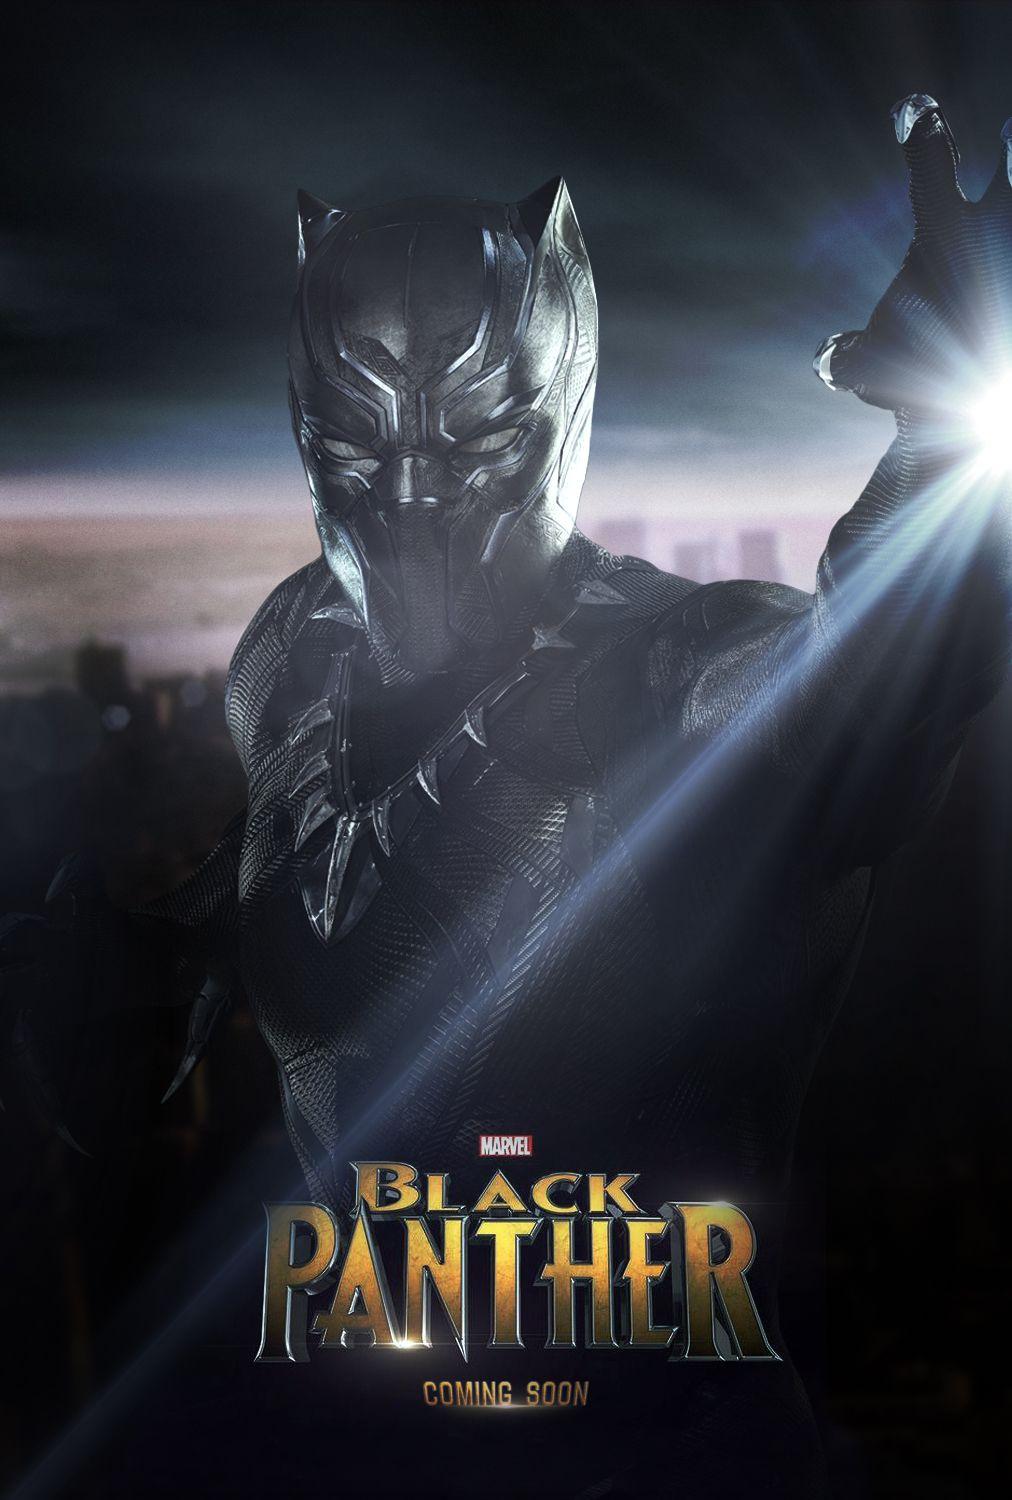 Black Panther Movie Poster wallpaper 2018 in Marvel